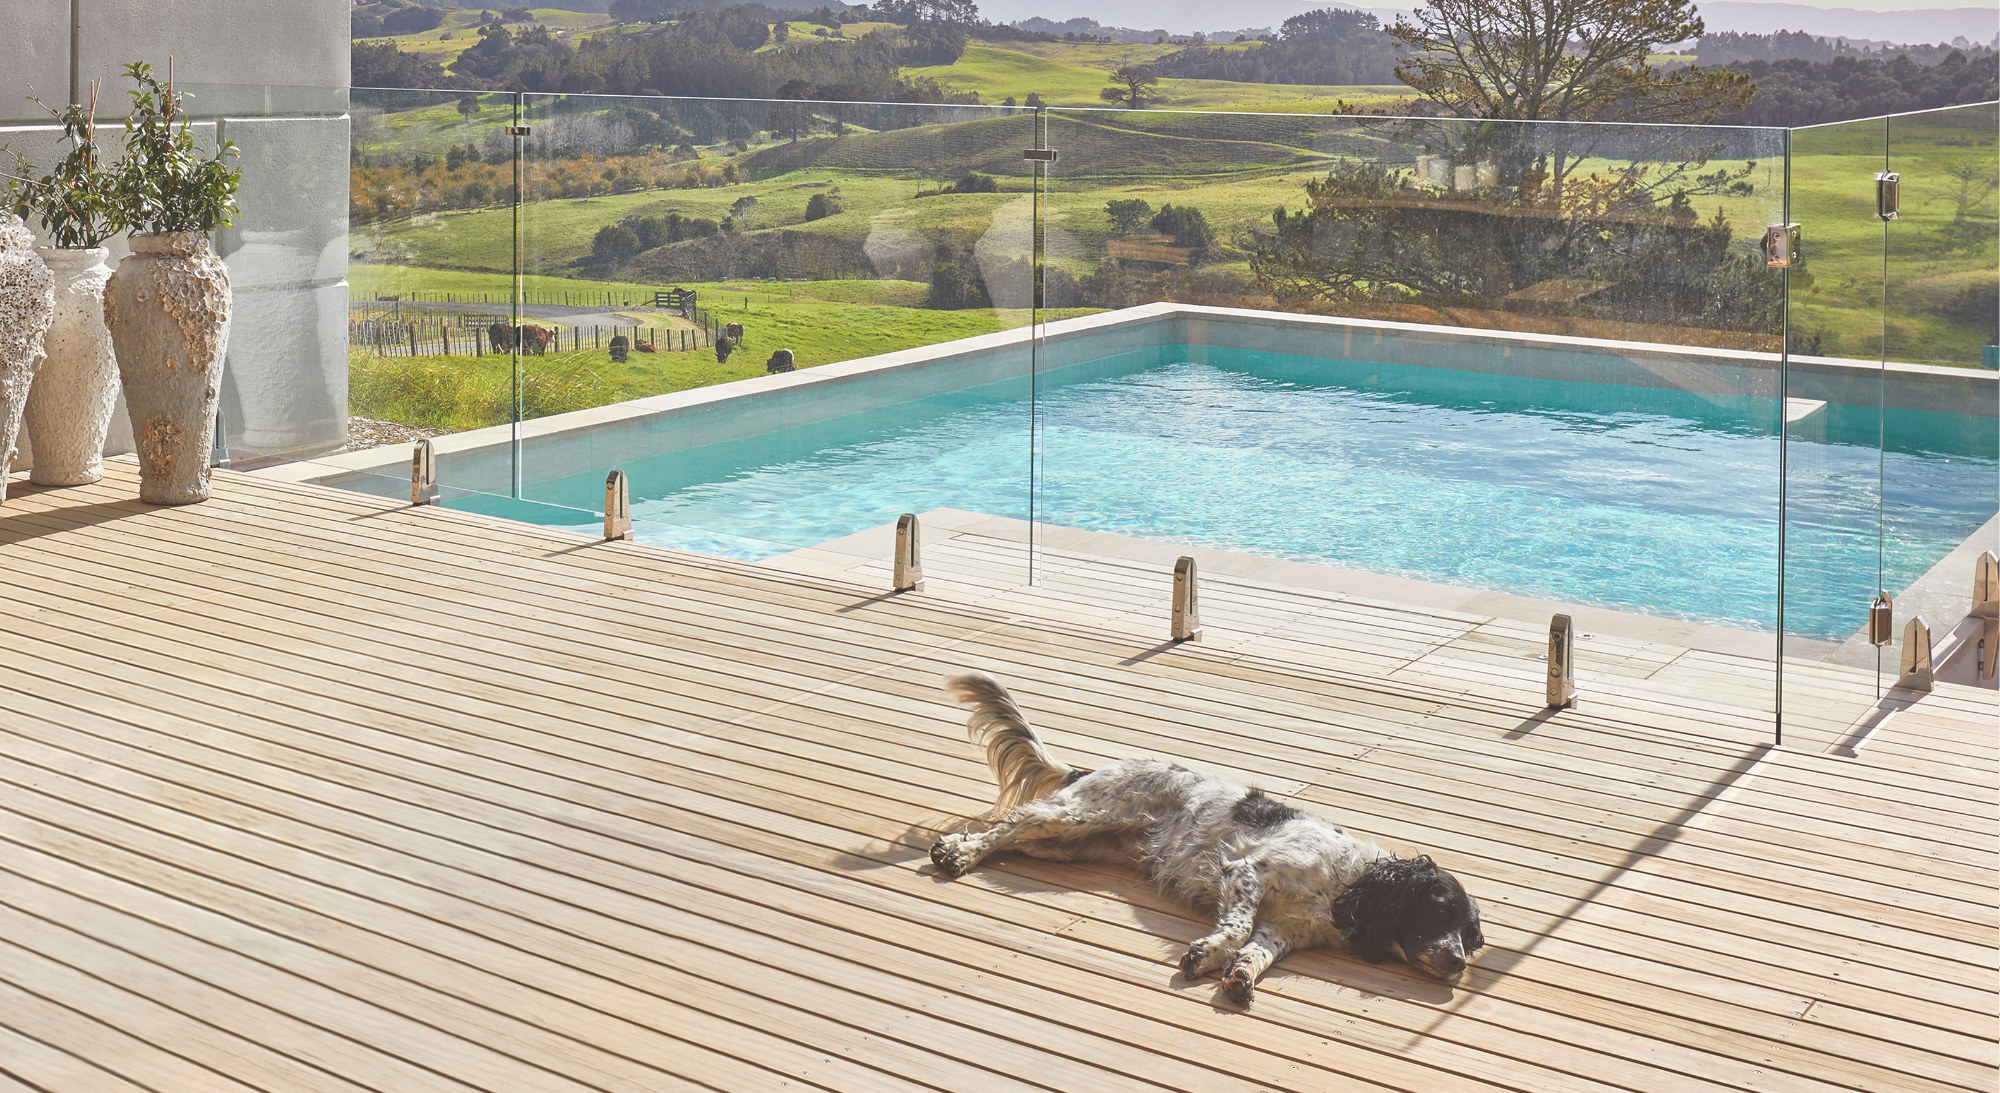 a dog lies on the deck by a pool in front of the rolling hills of the farm estate